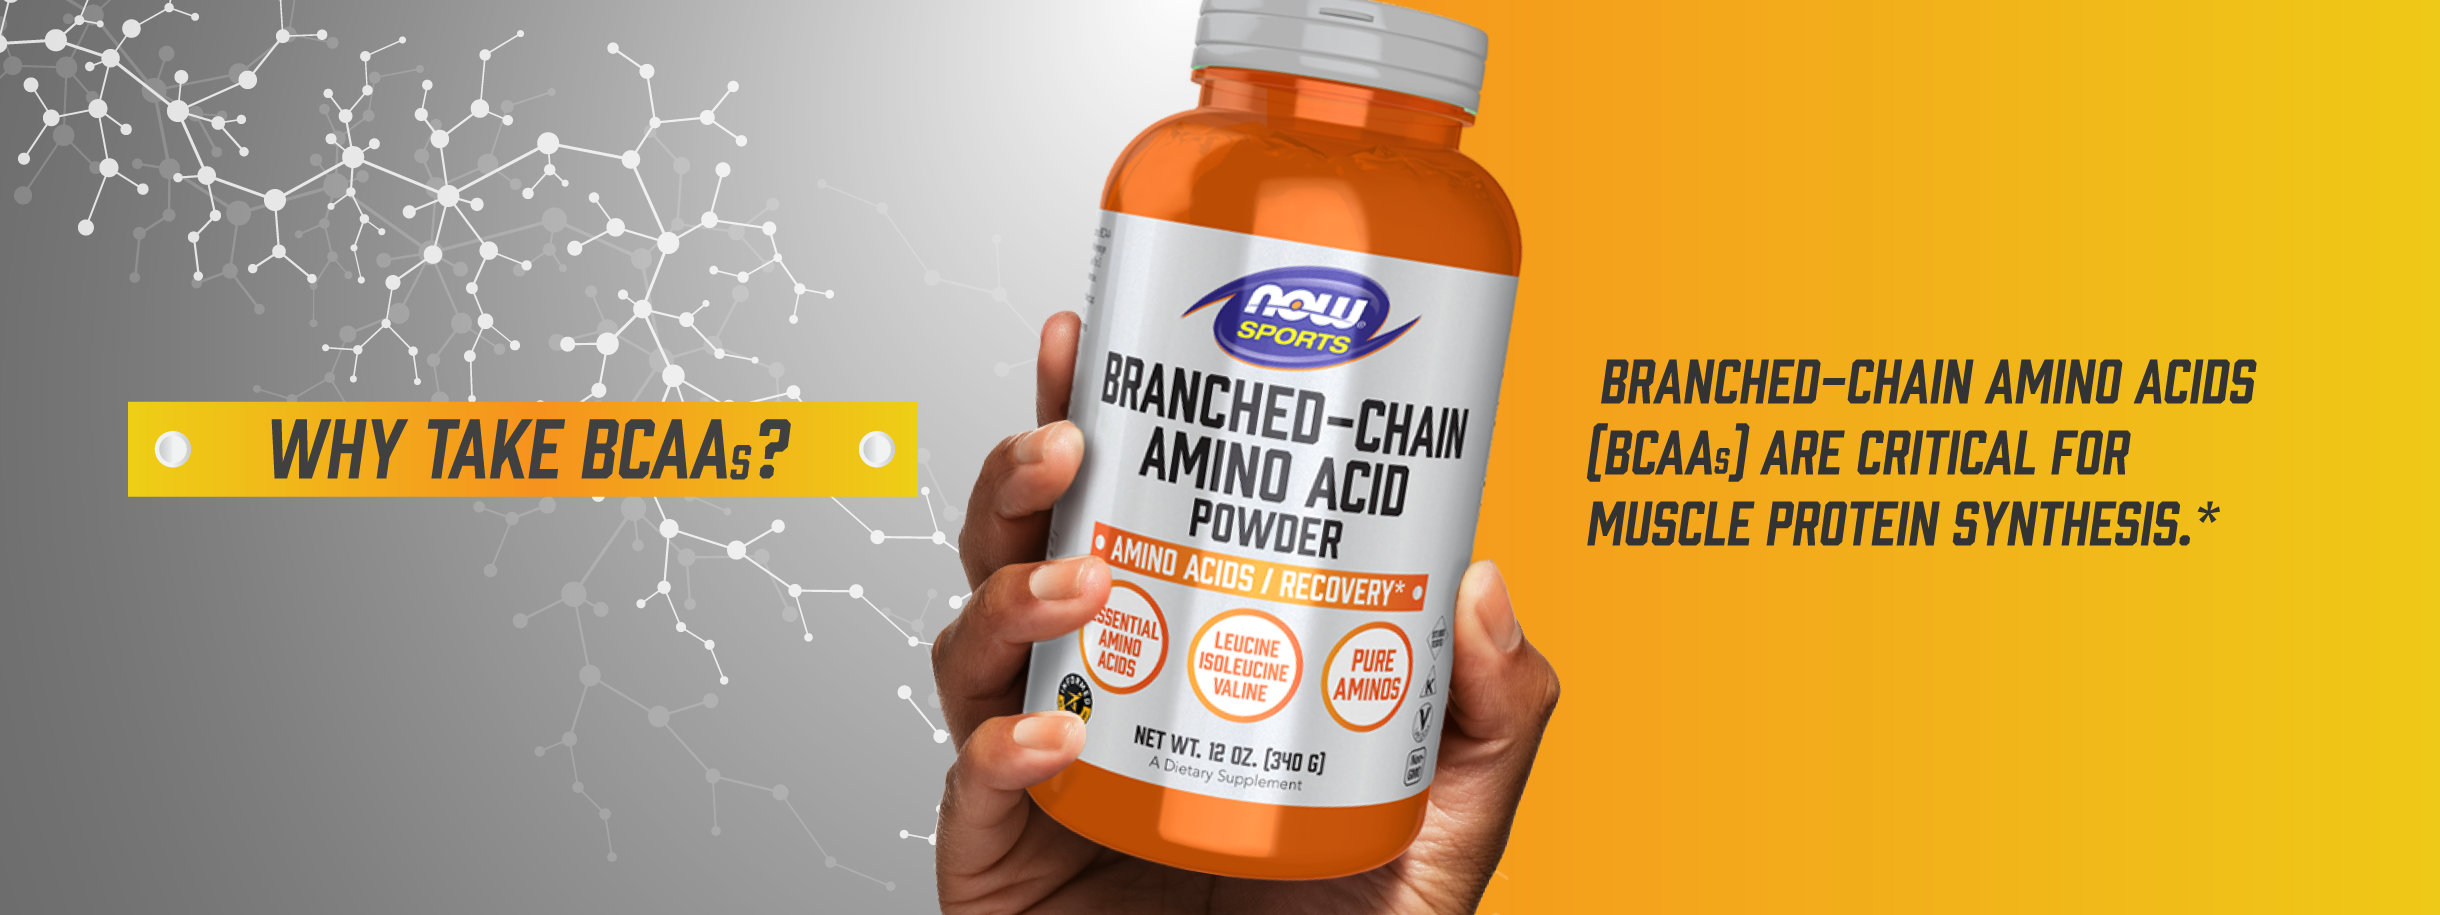 Why Take BCAAs?  Branched-chain amino acids (BCAAs) are critical for muscle protein synthesis.*